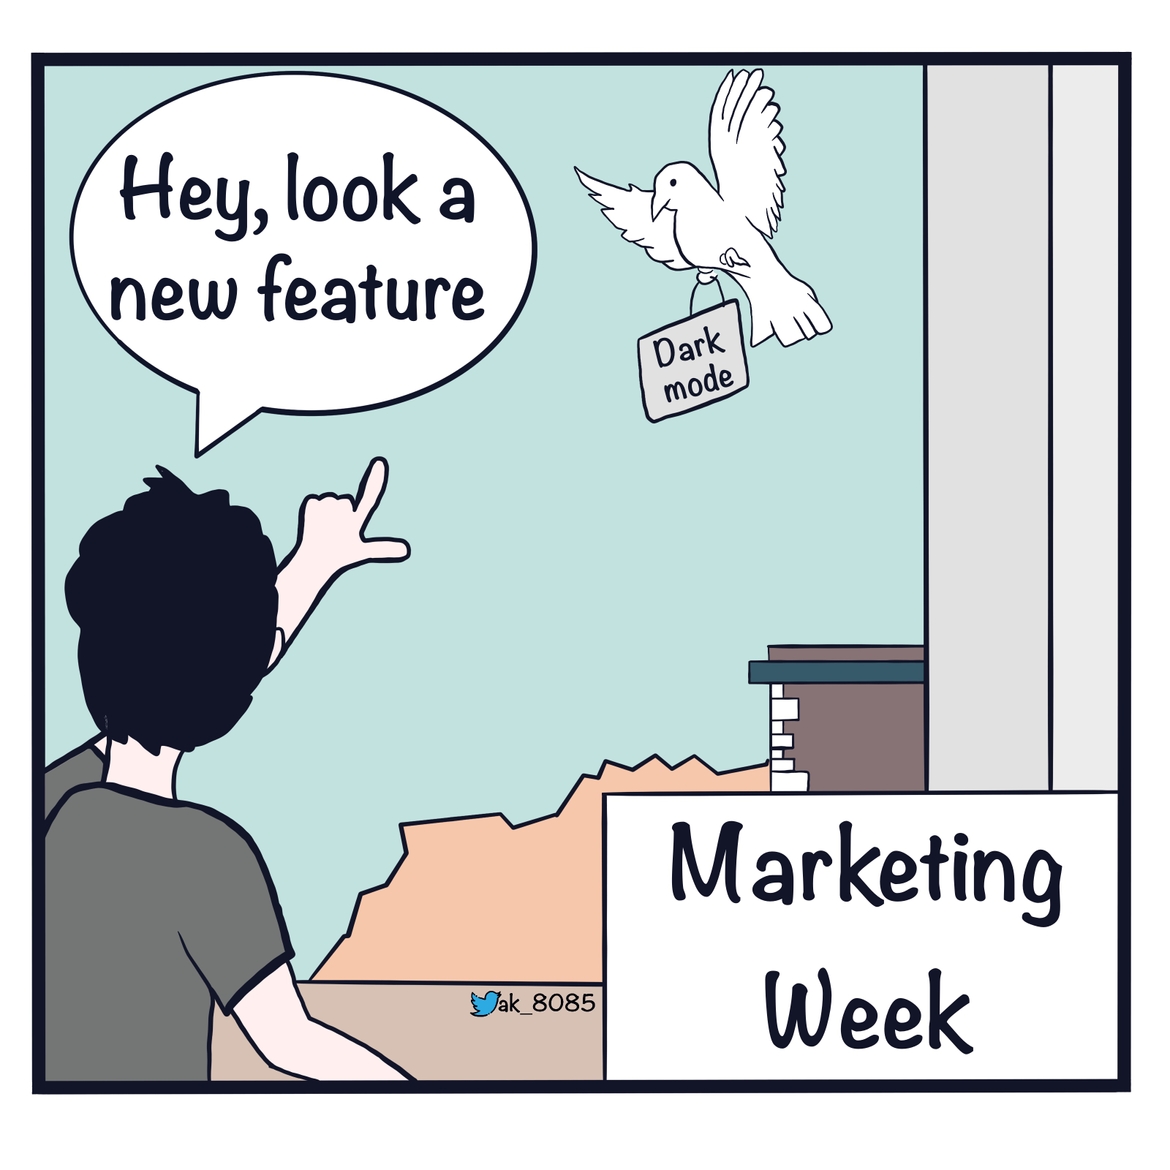 There are many distractions in a marketing week!!